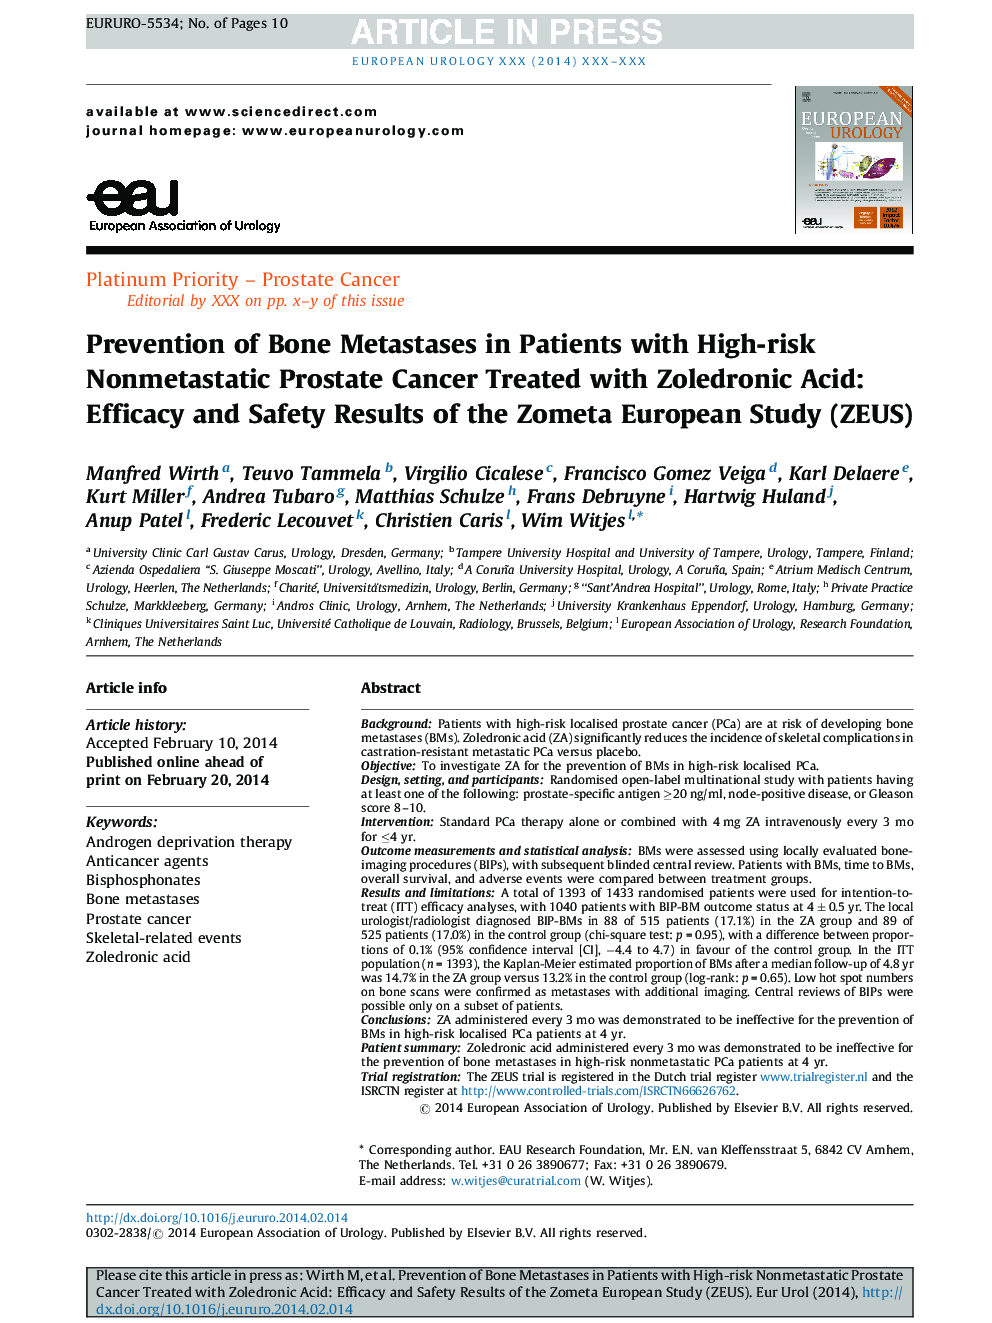 Prevention of Bone Metastases in Patients with High-risk Nonmetastatic Prostate Cancer Treated with Zoledronic Acid: Efficacy and Safety Results of the Zometa European Study (ZEUS)